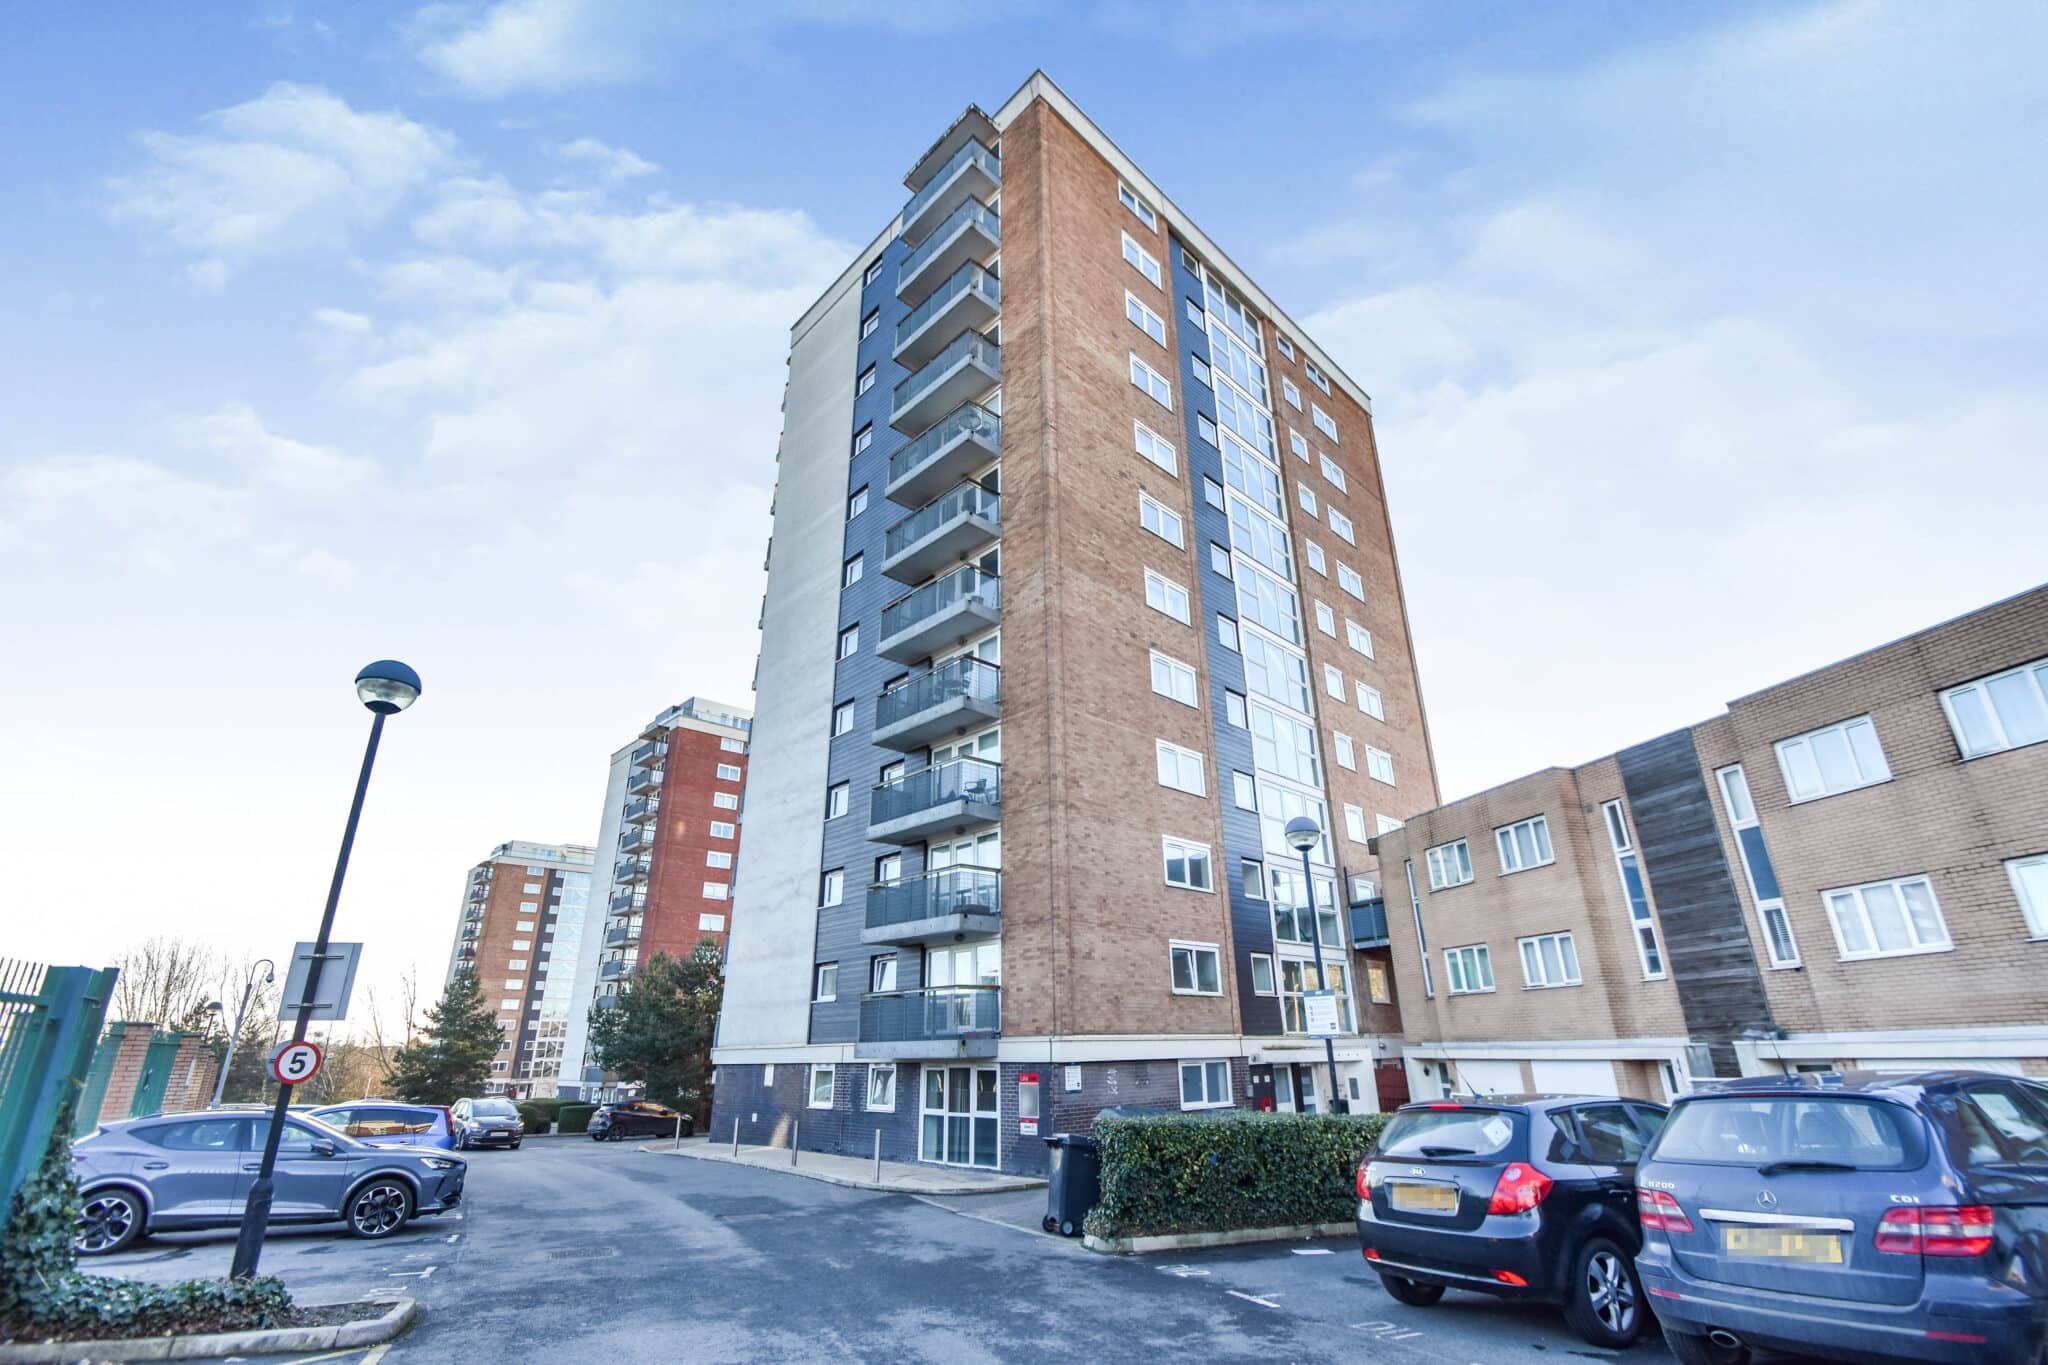 Apartment 17, 22 Lakeside Rise, Manchester, Manchester, M9 8QE